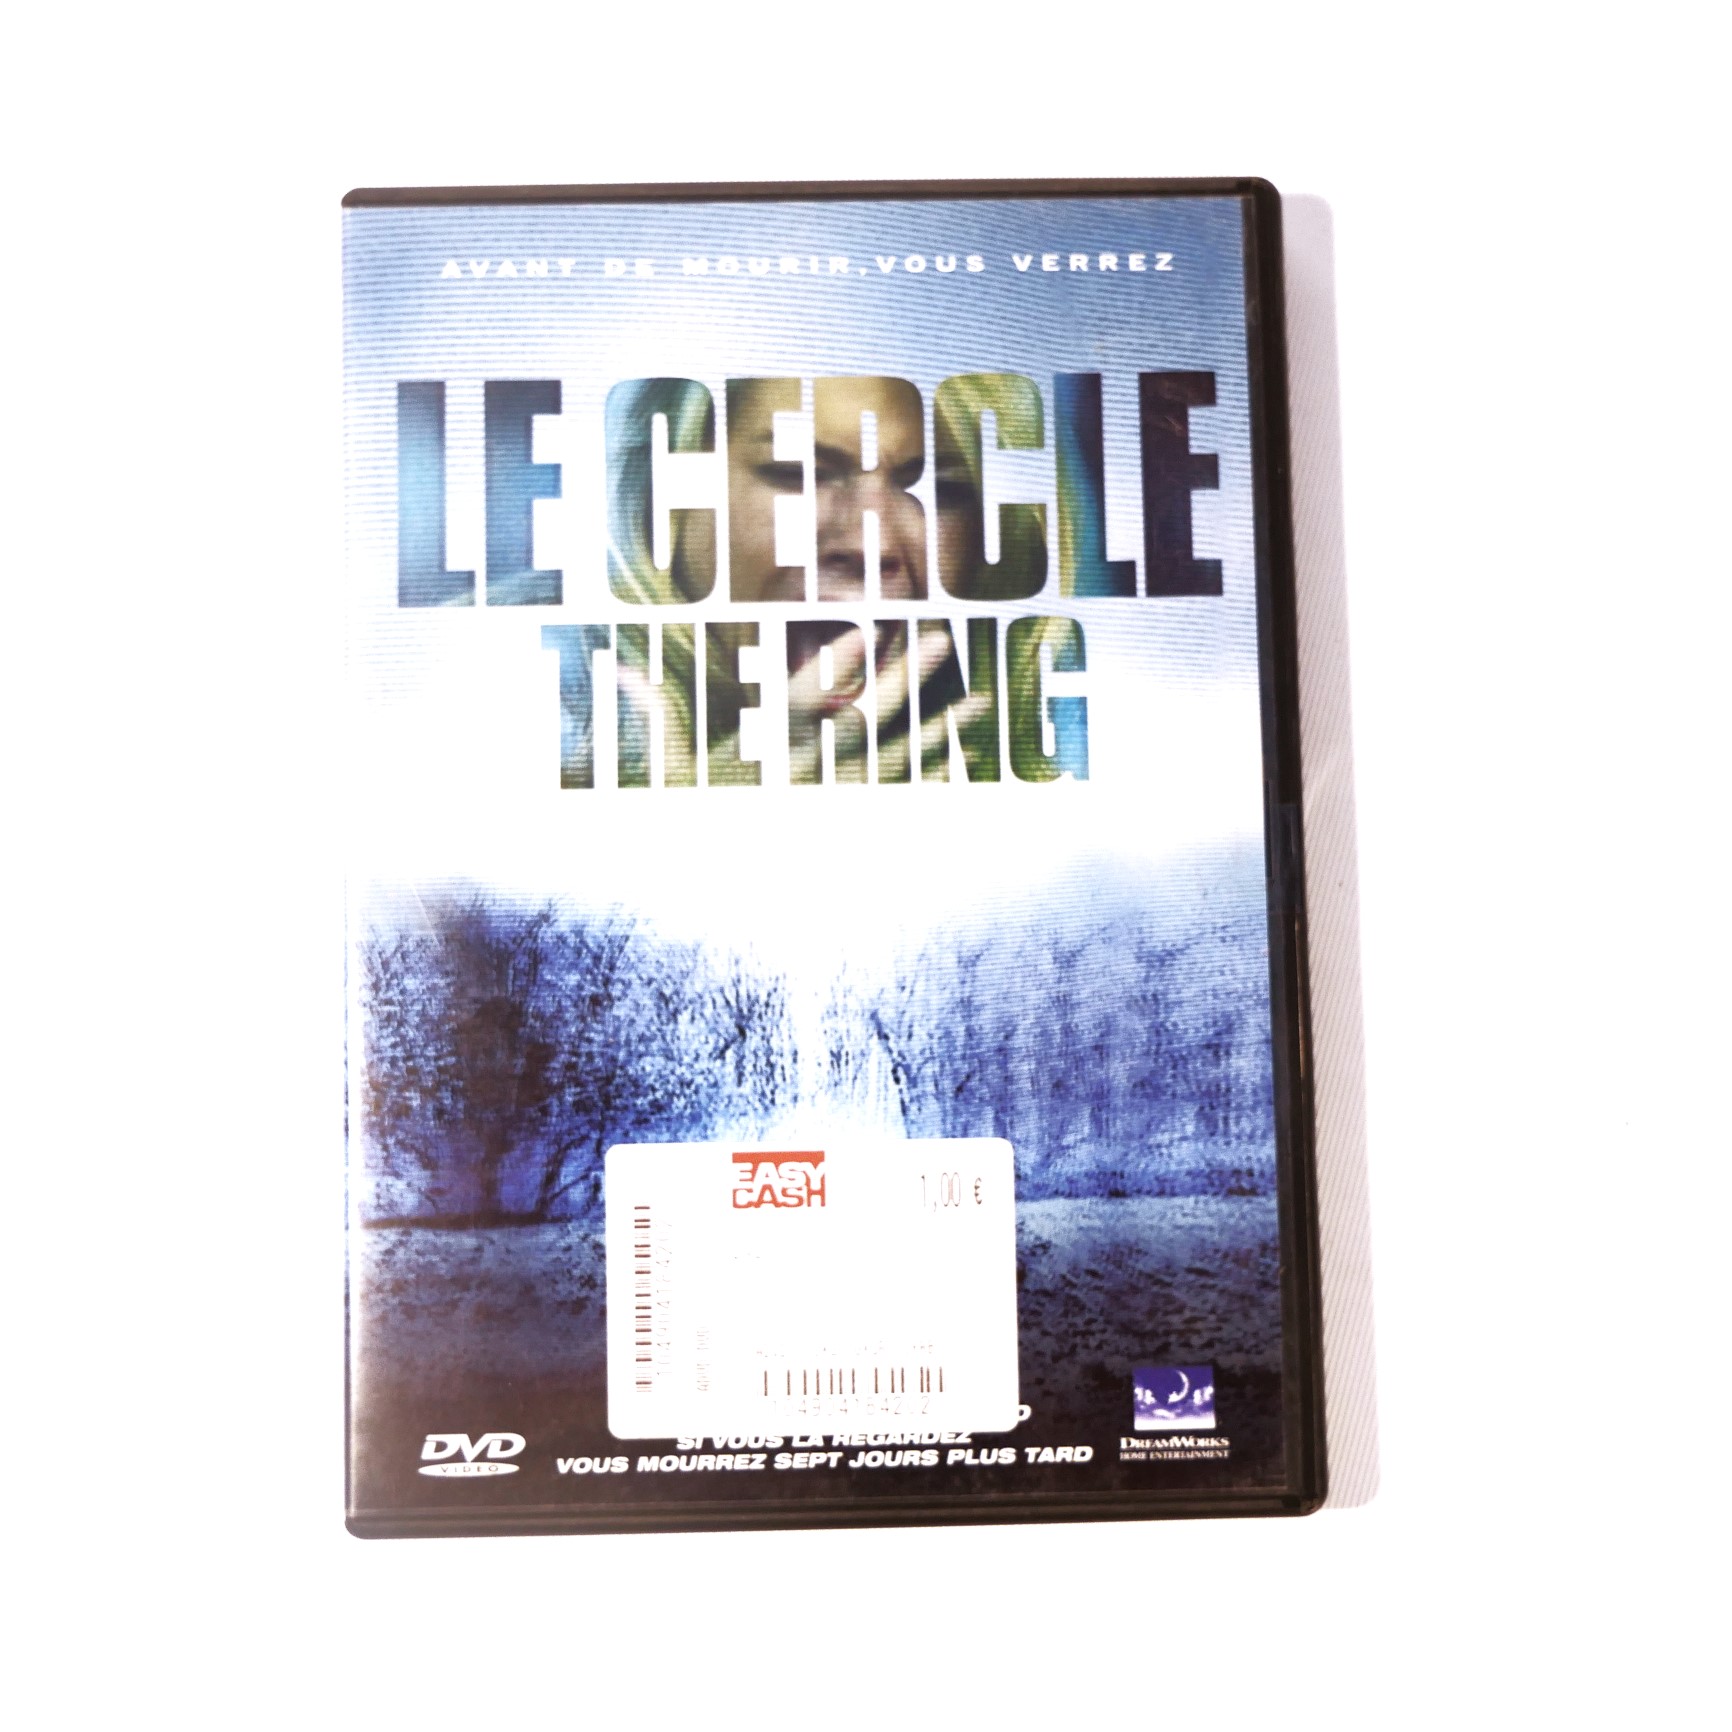 Le cercle/ The ring